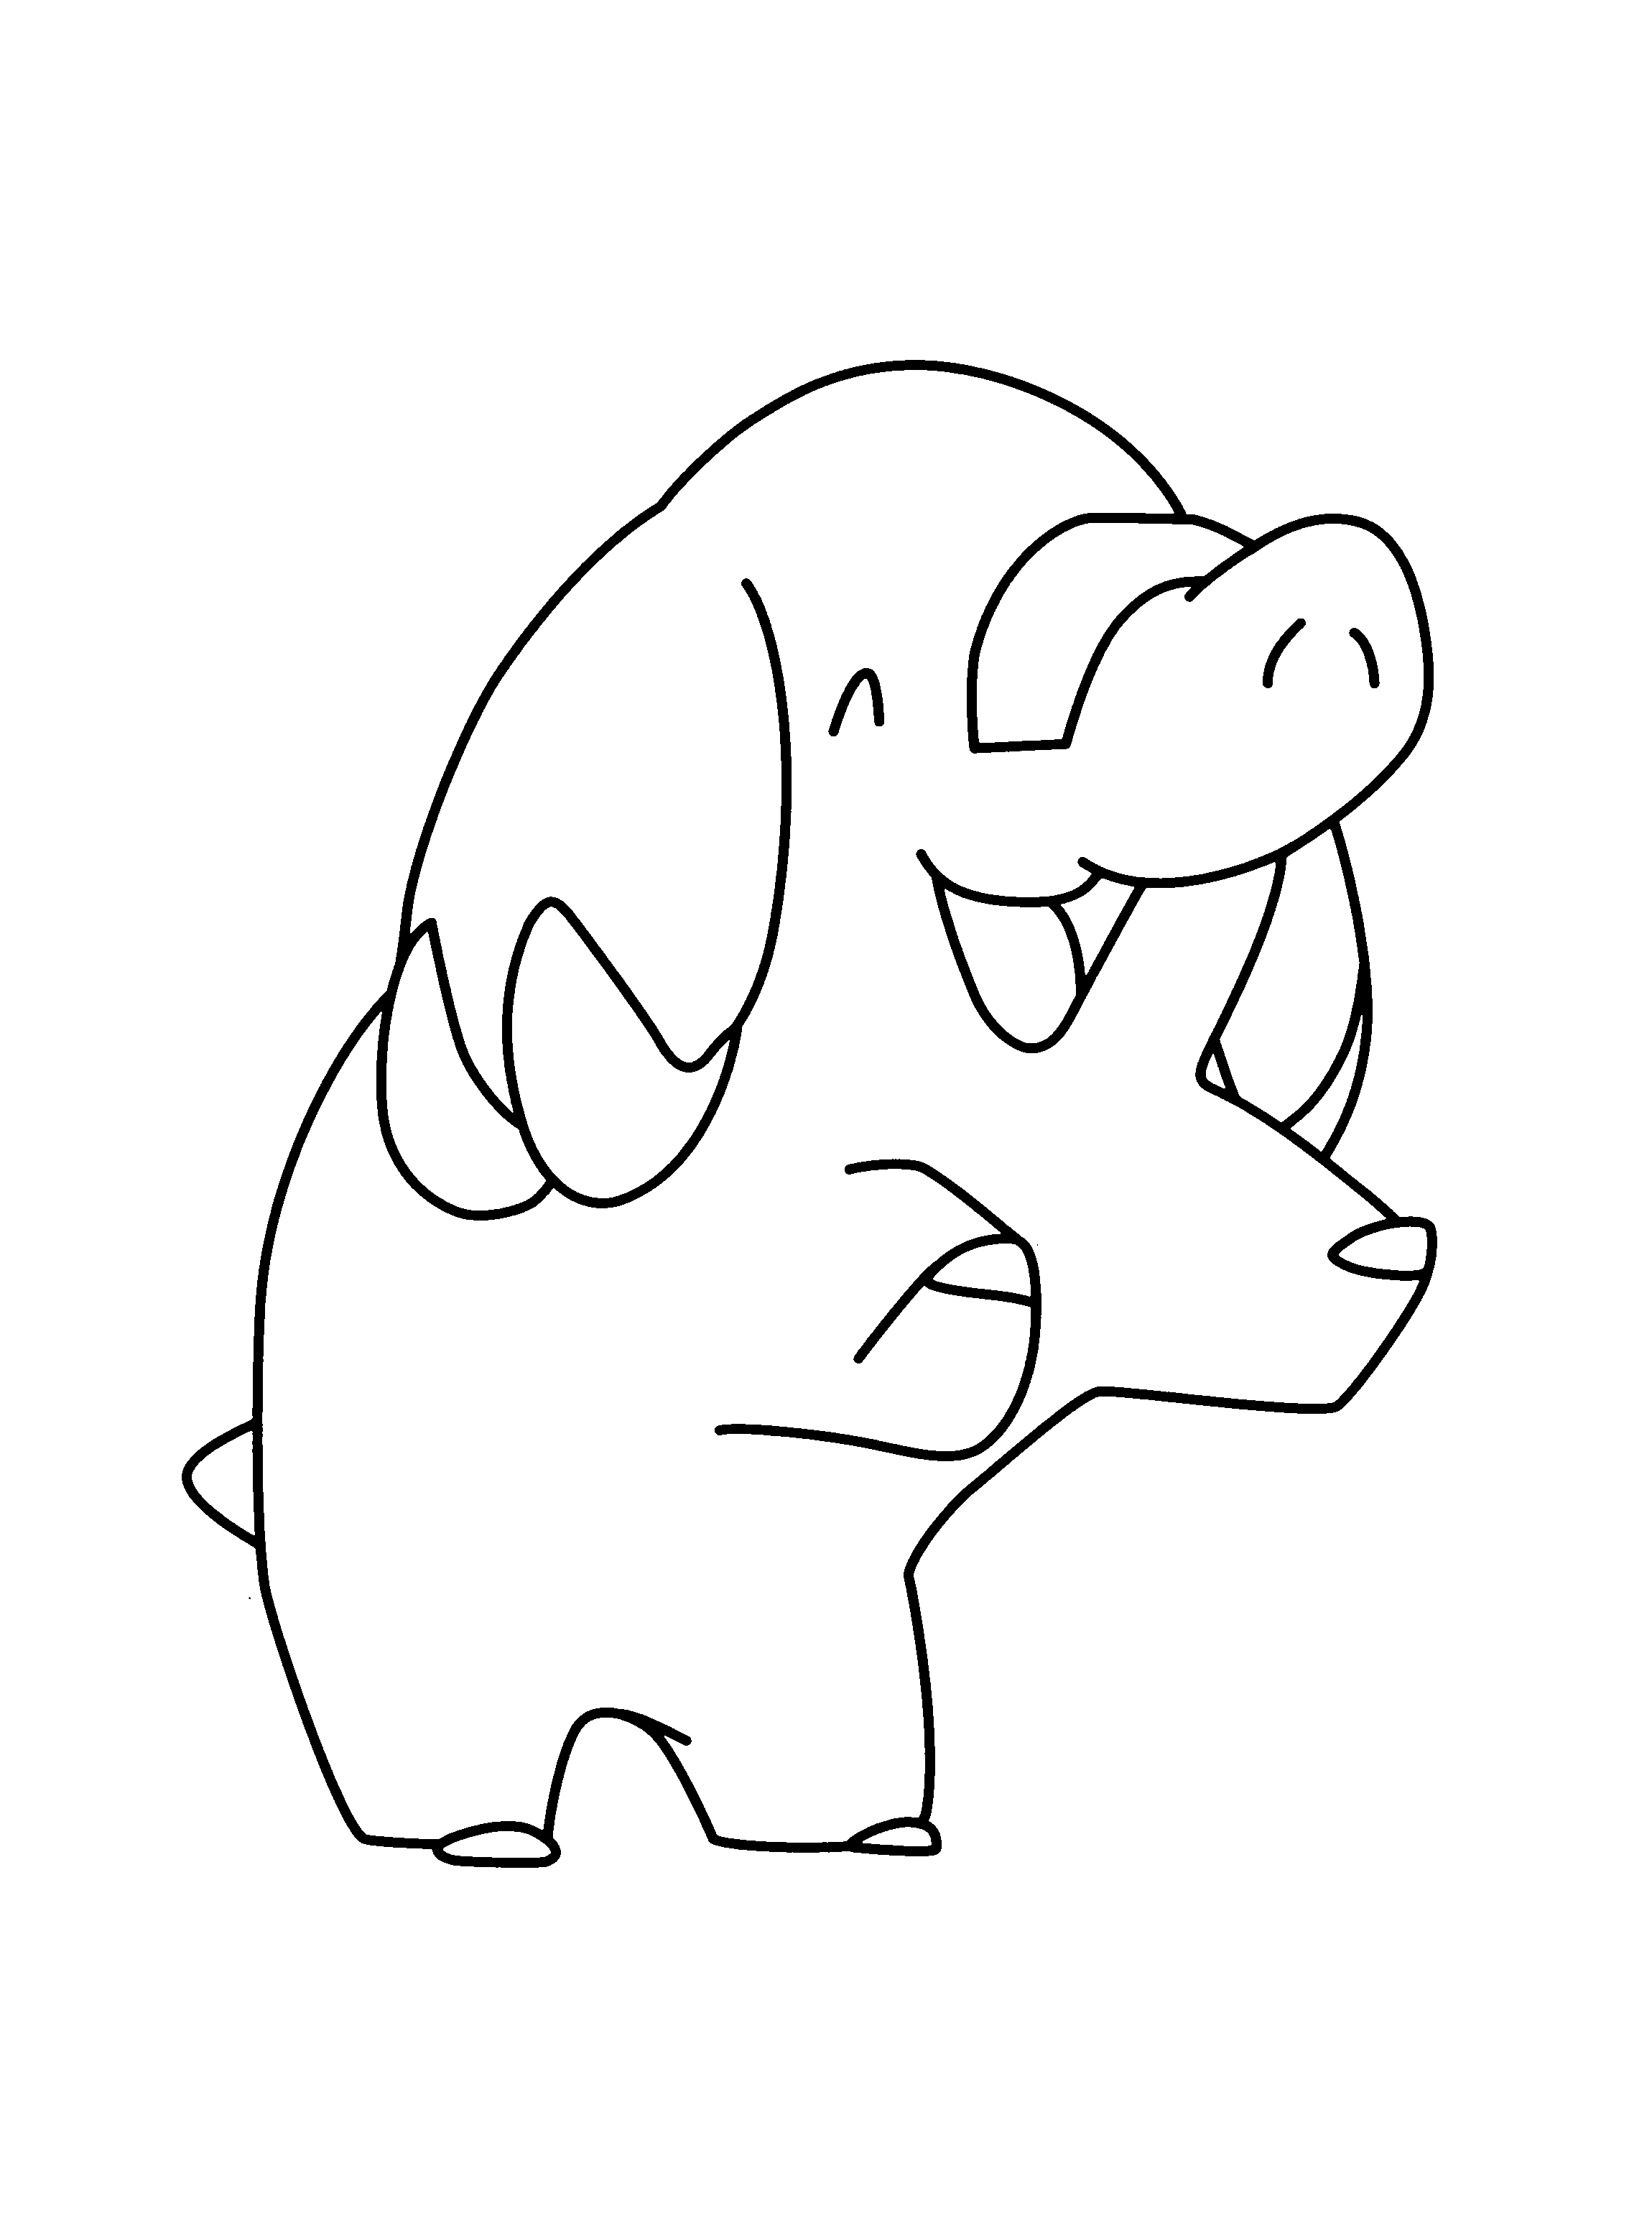 animated-coloring-pages-pokemon-image-0446